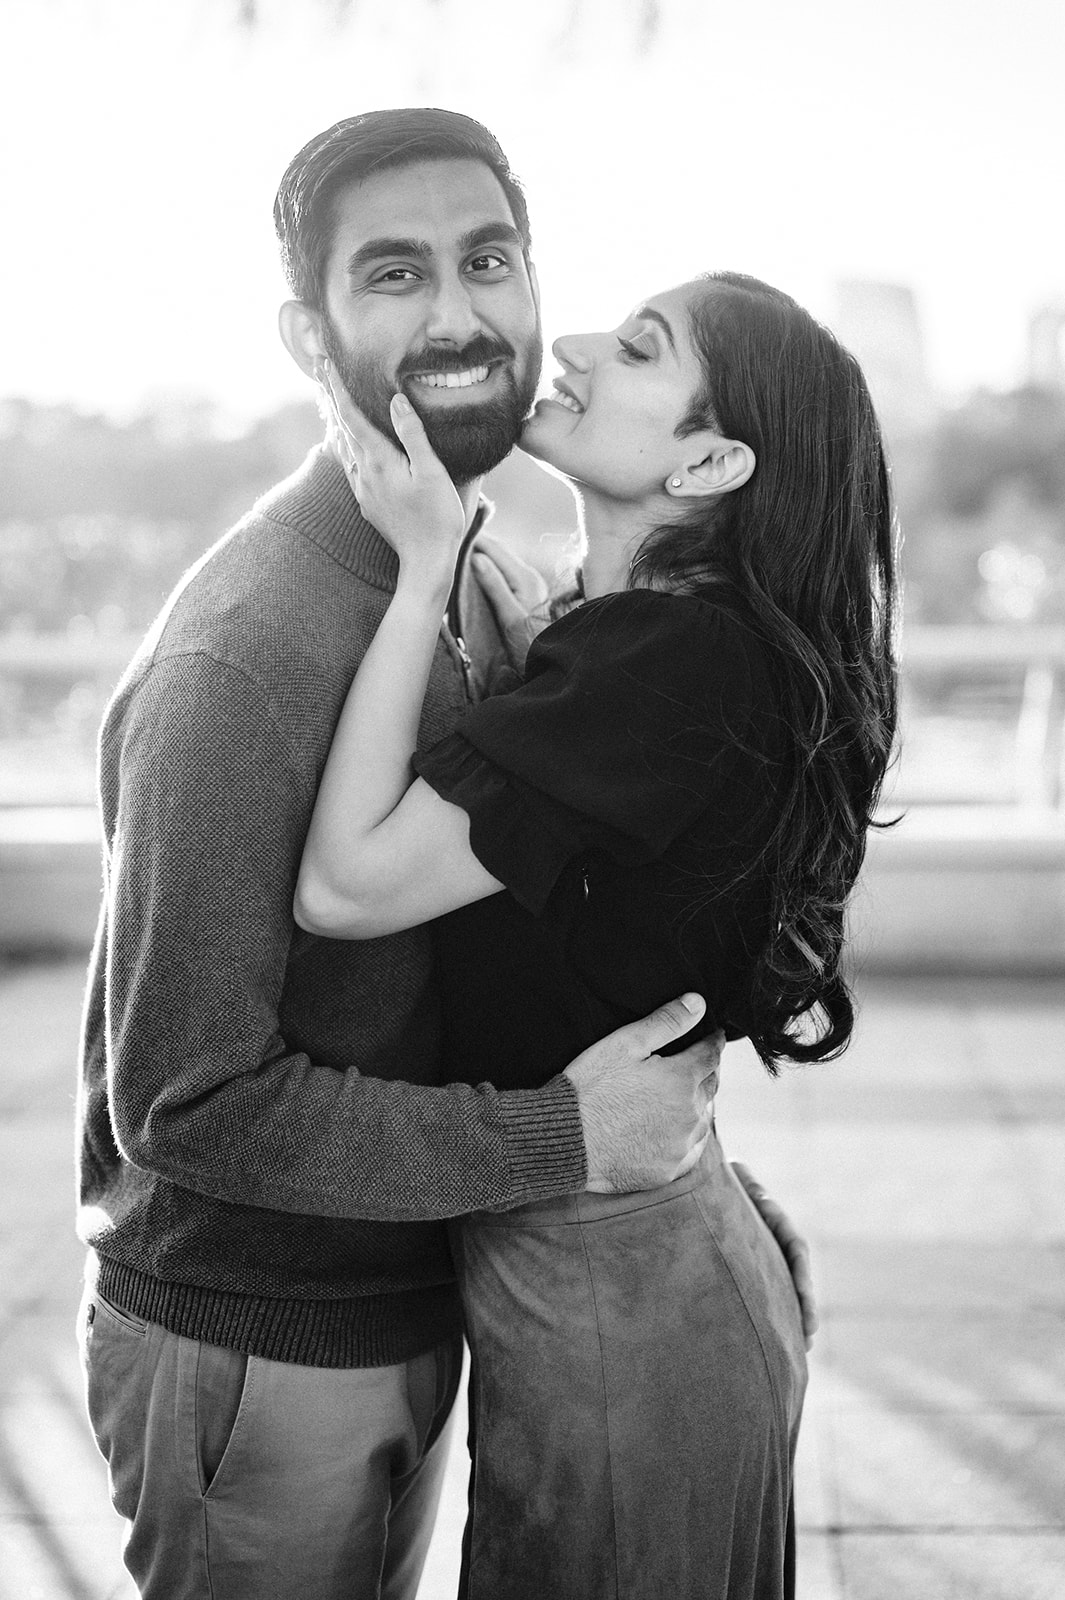 Timeless Engagement Session At The Kennedy Center